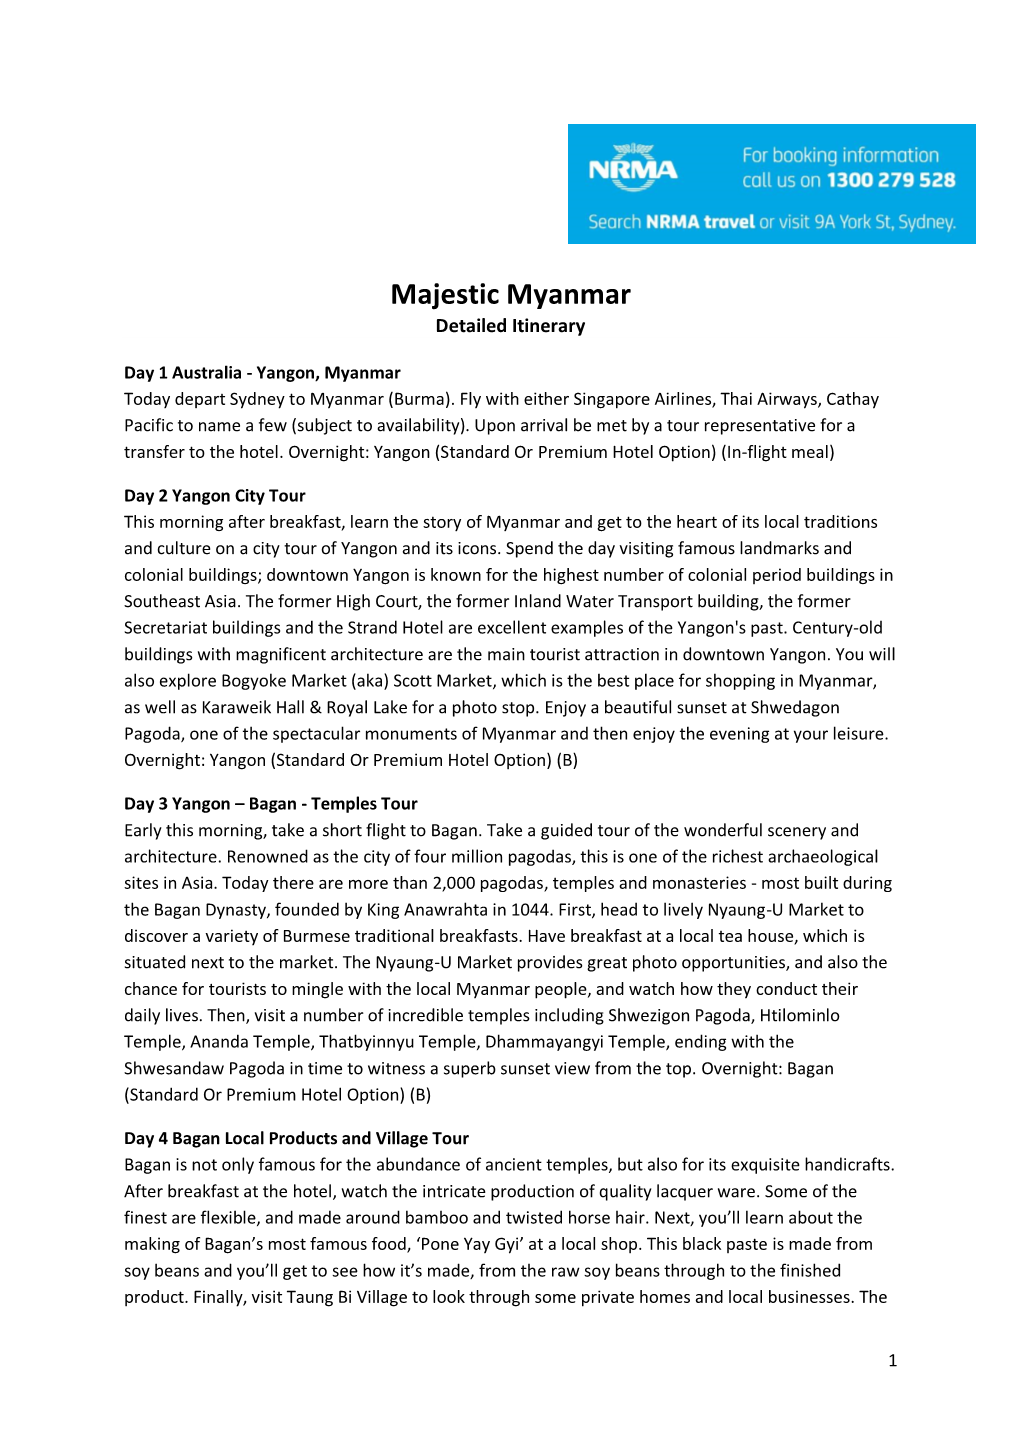 Majestic Myanmar Detailed Itinerary